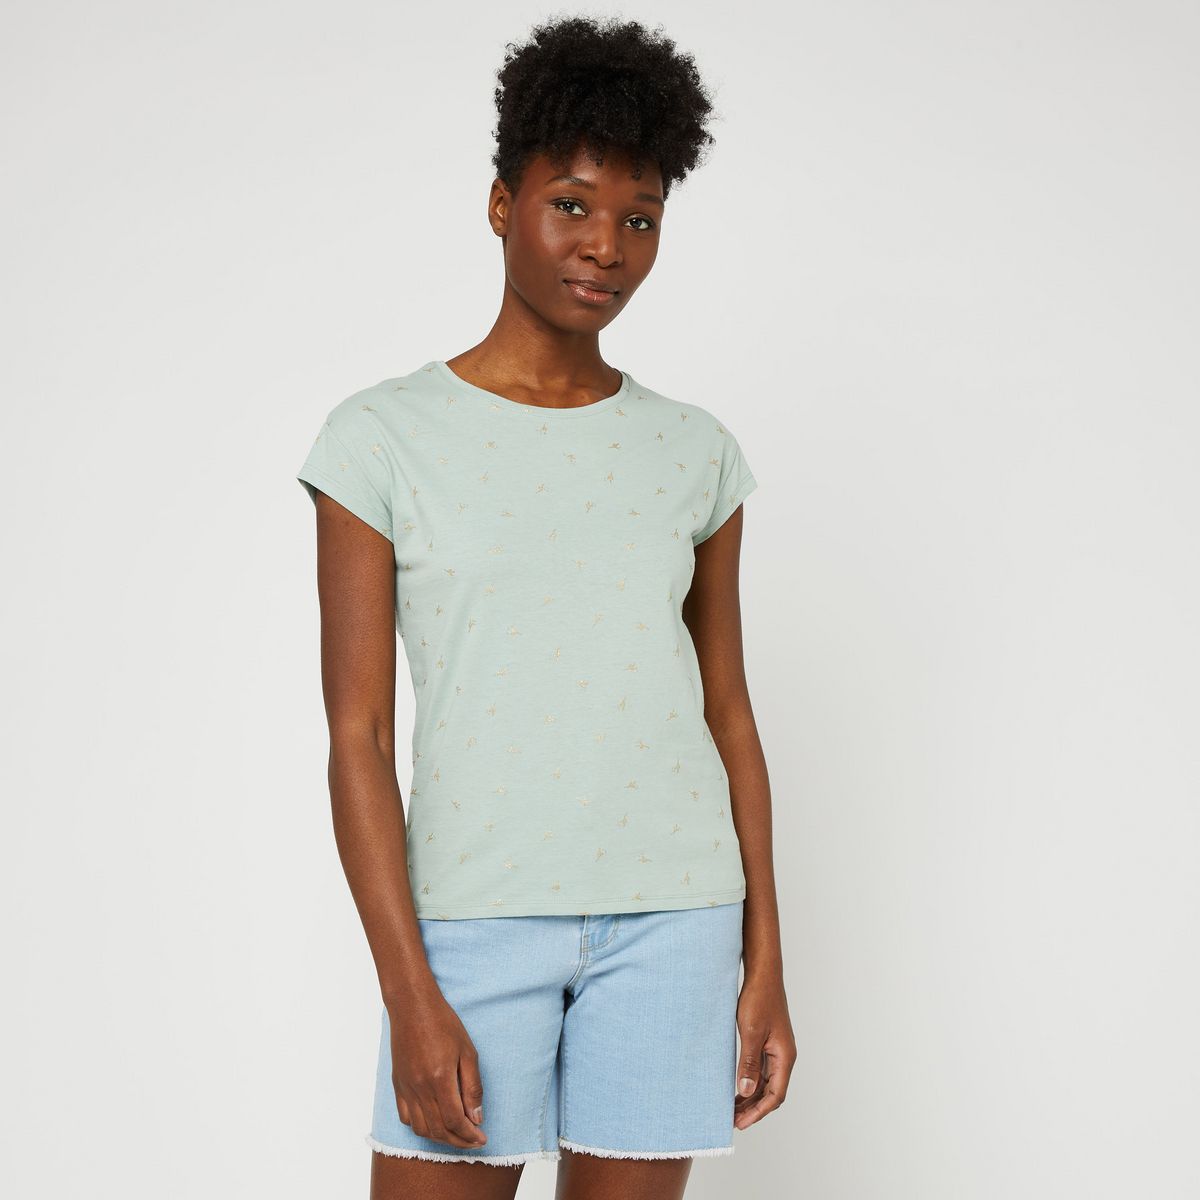 INEXTENSO T-shirt Turquoise femme